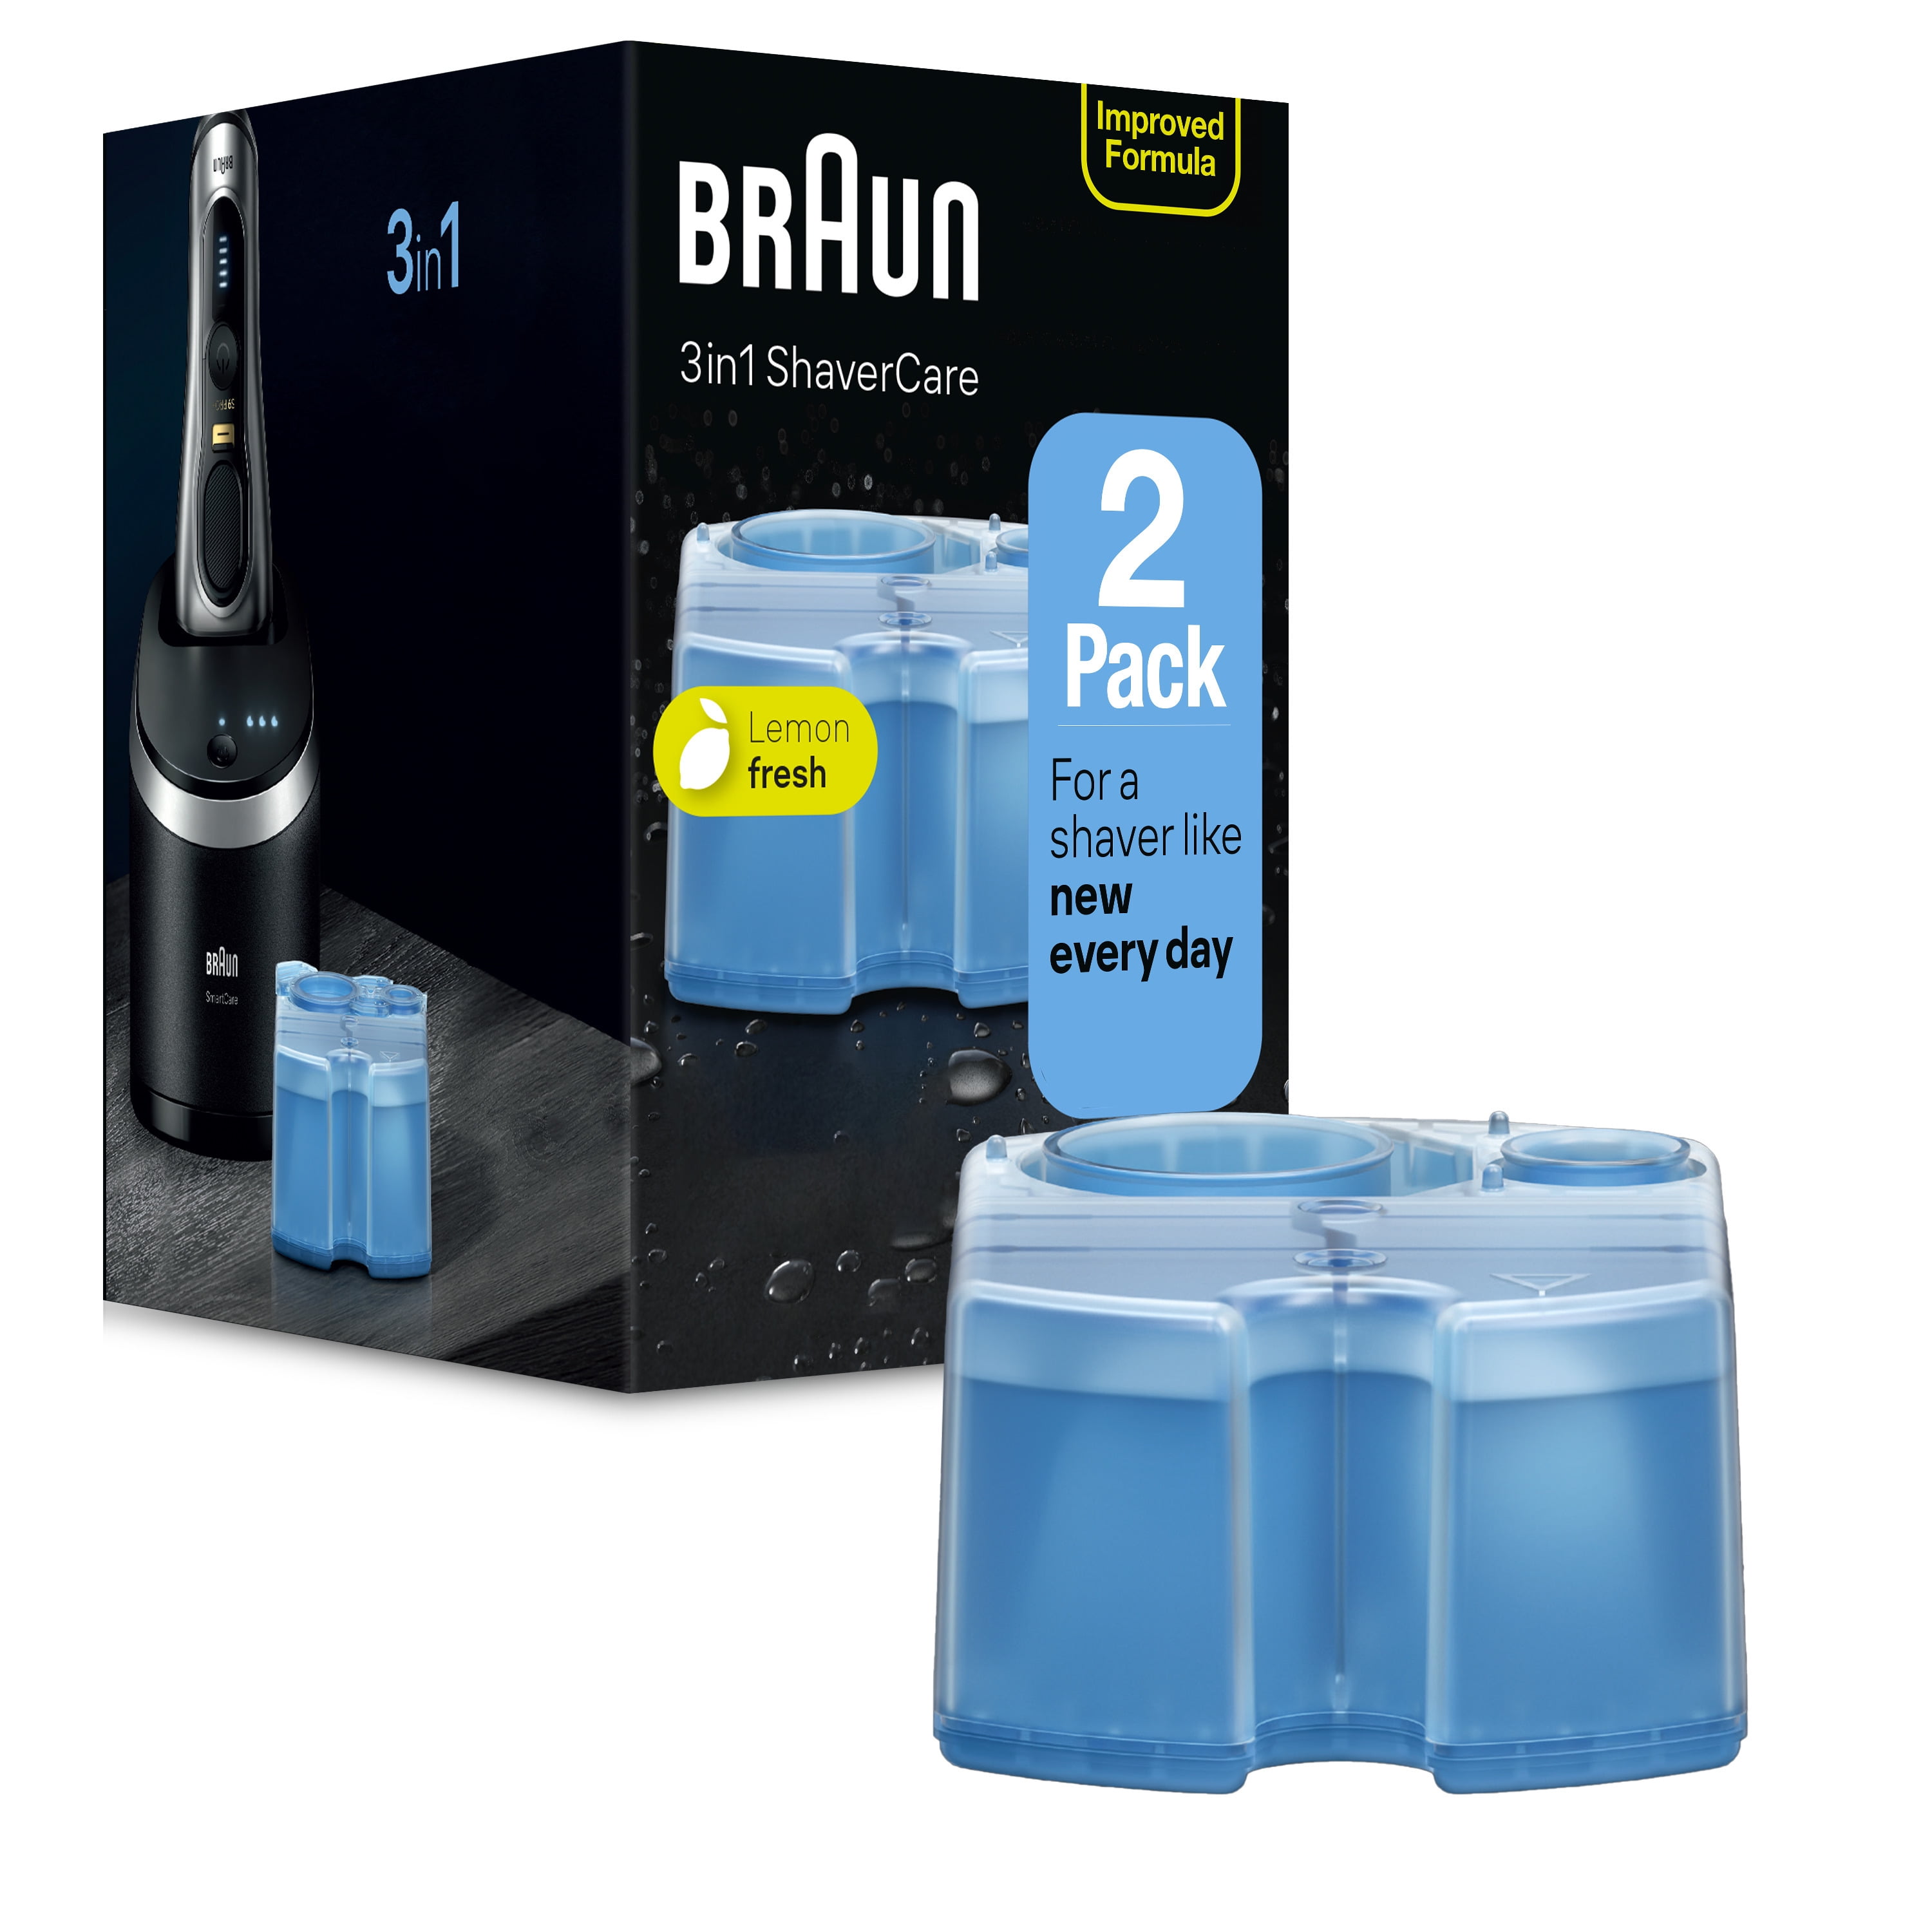 Braun Ccr2 Cleaner Refill Kit Renew Shaver Cleaning Gel, Pack Of 2